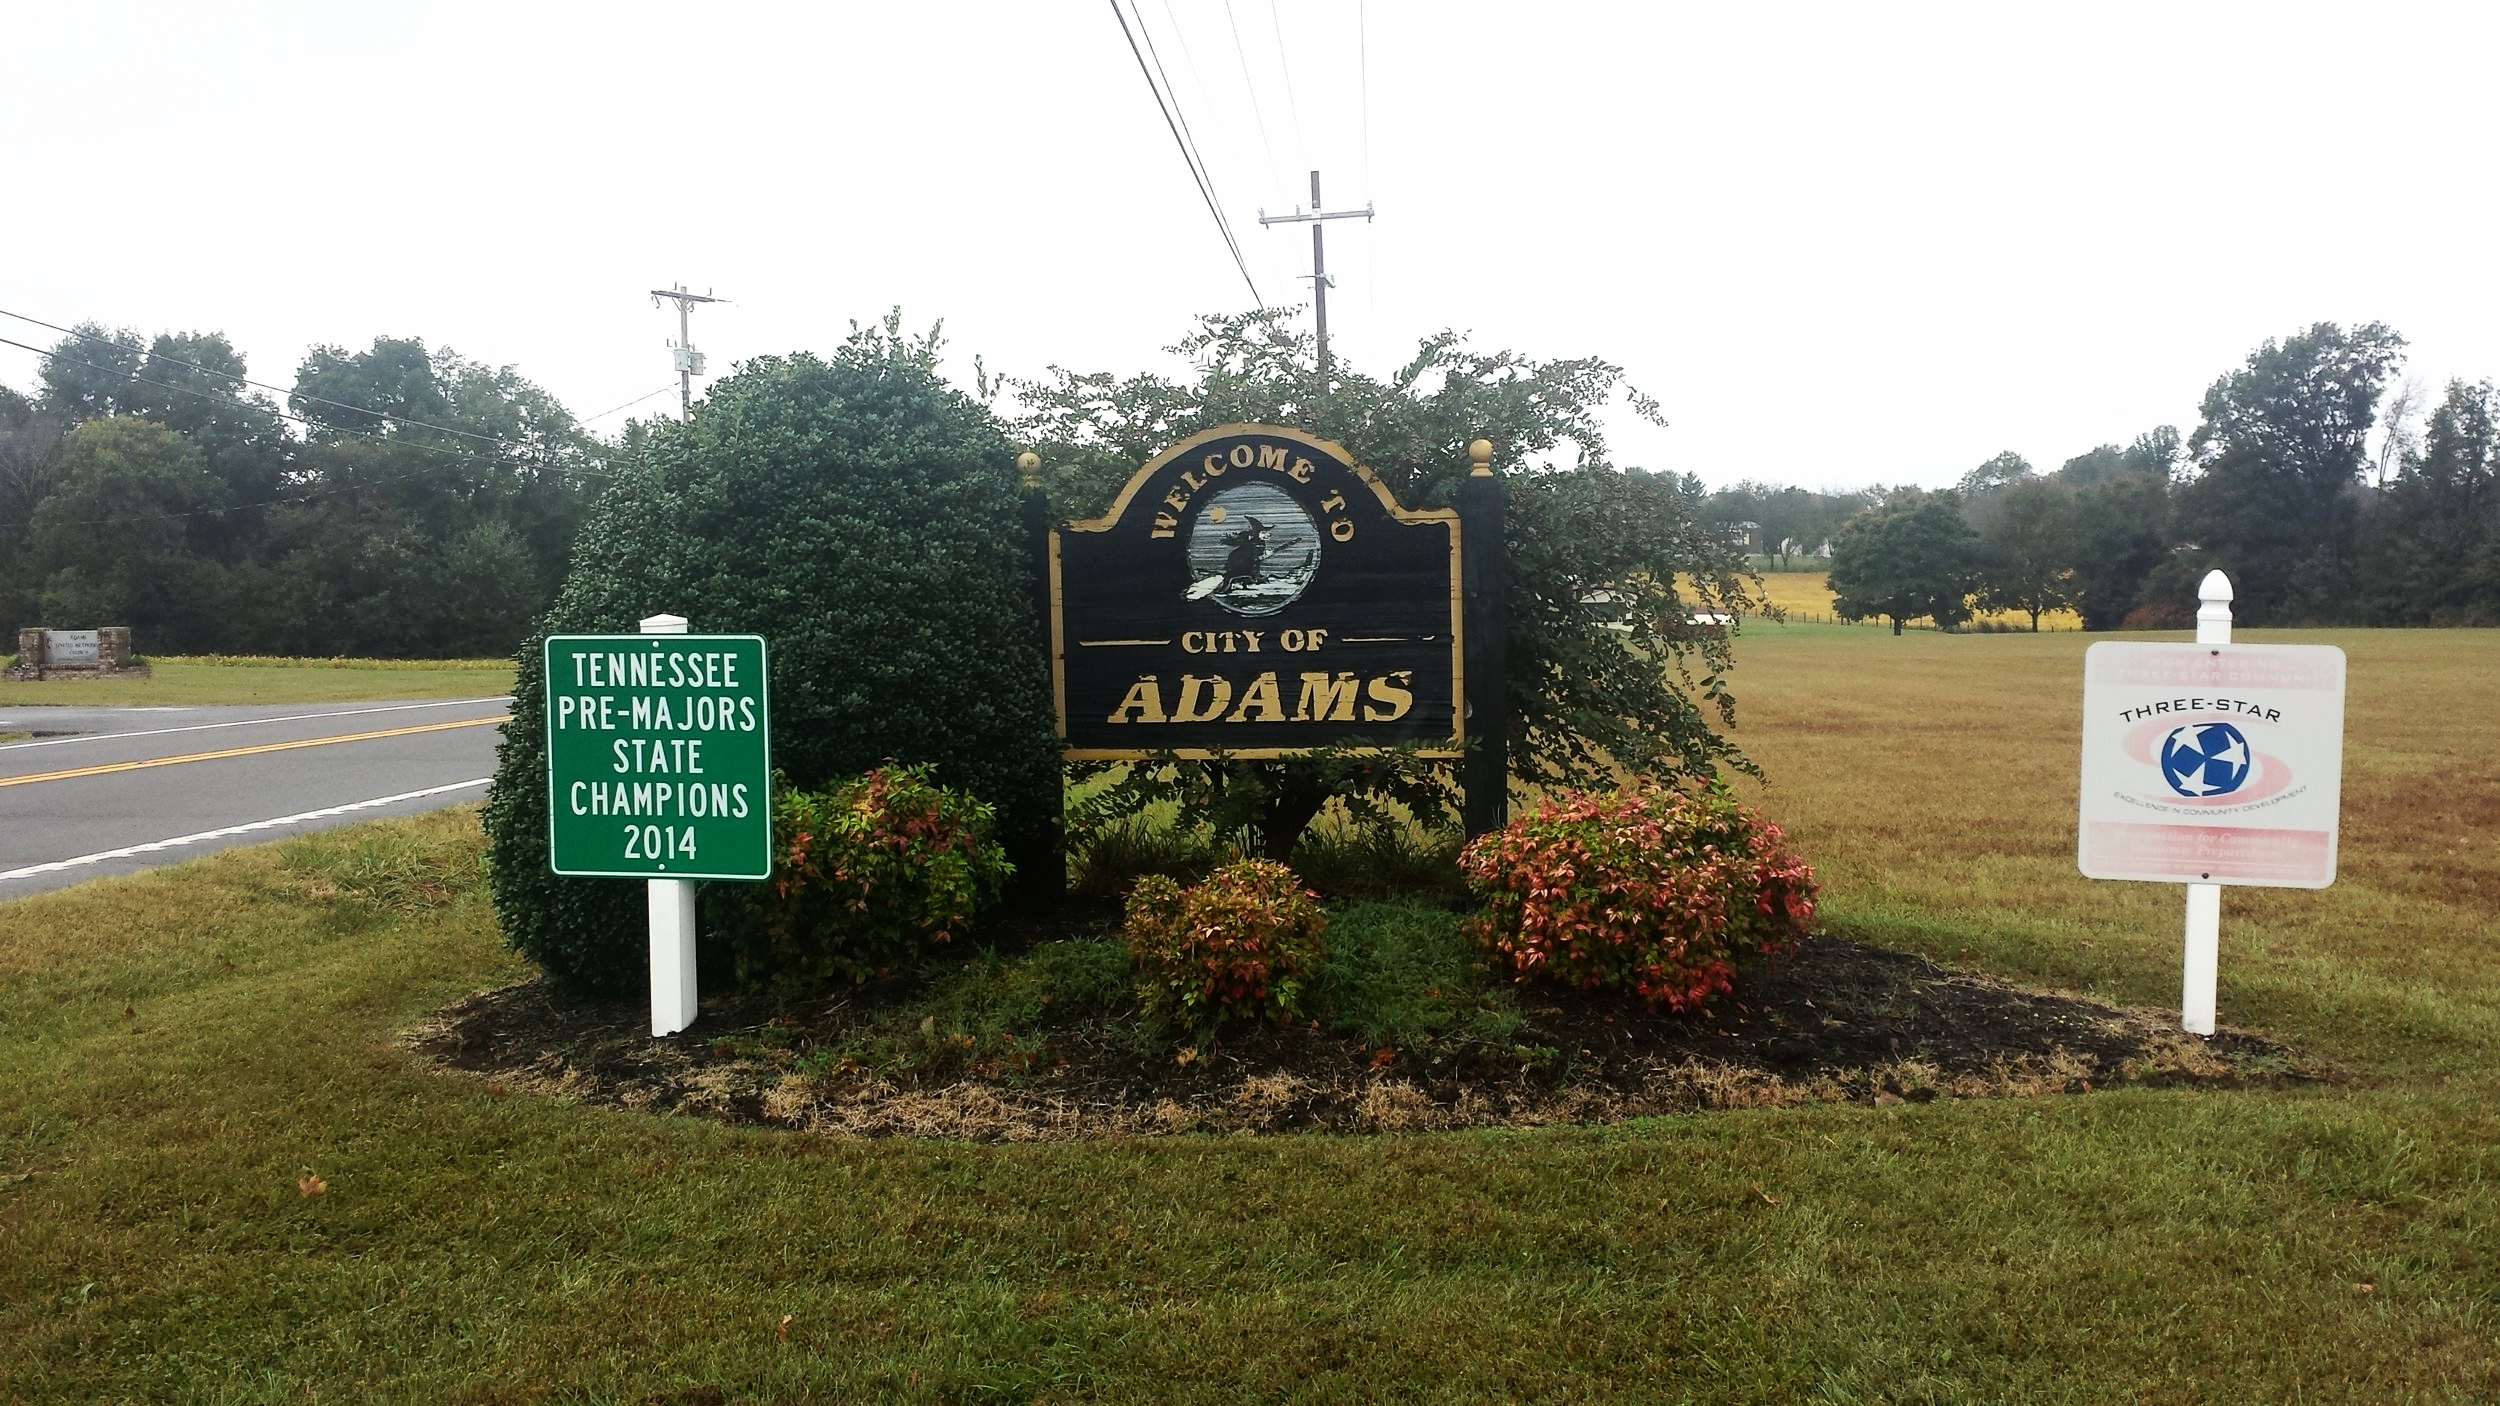 Entrance to the town of Adams, TN